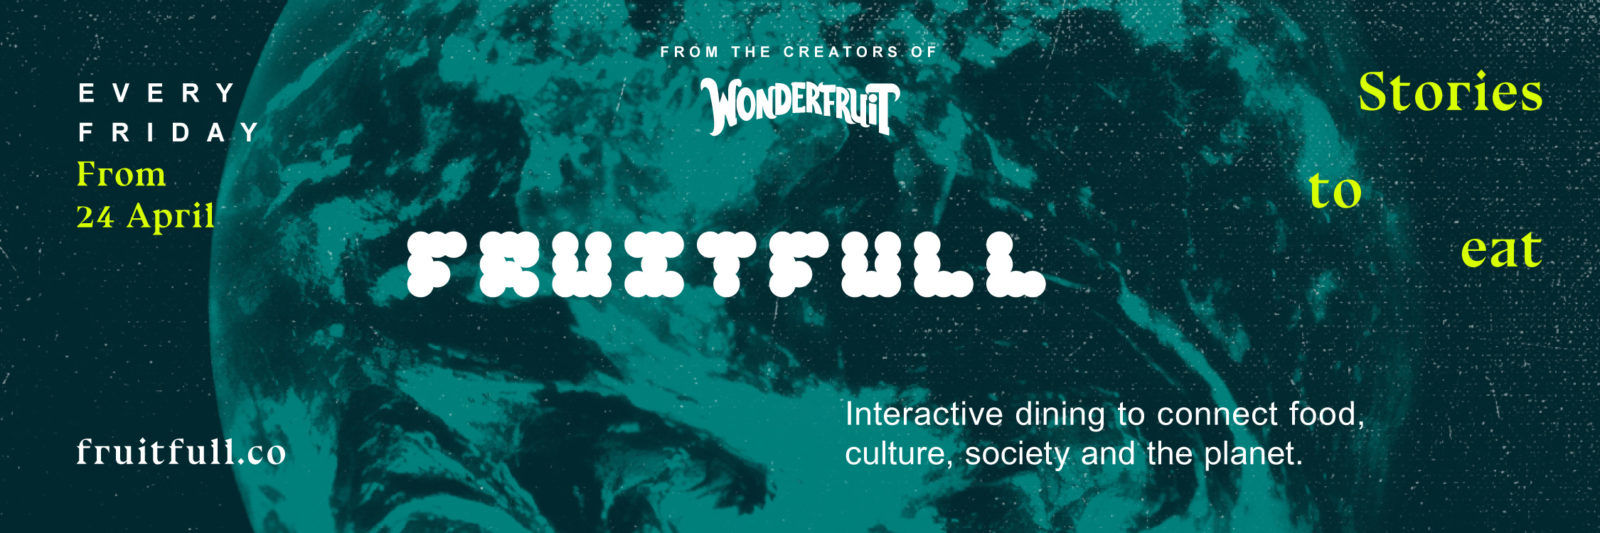 Meet Fruitfull: a sustainable new dining concept by Wonderfruit